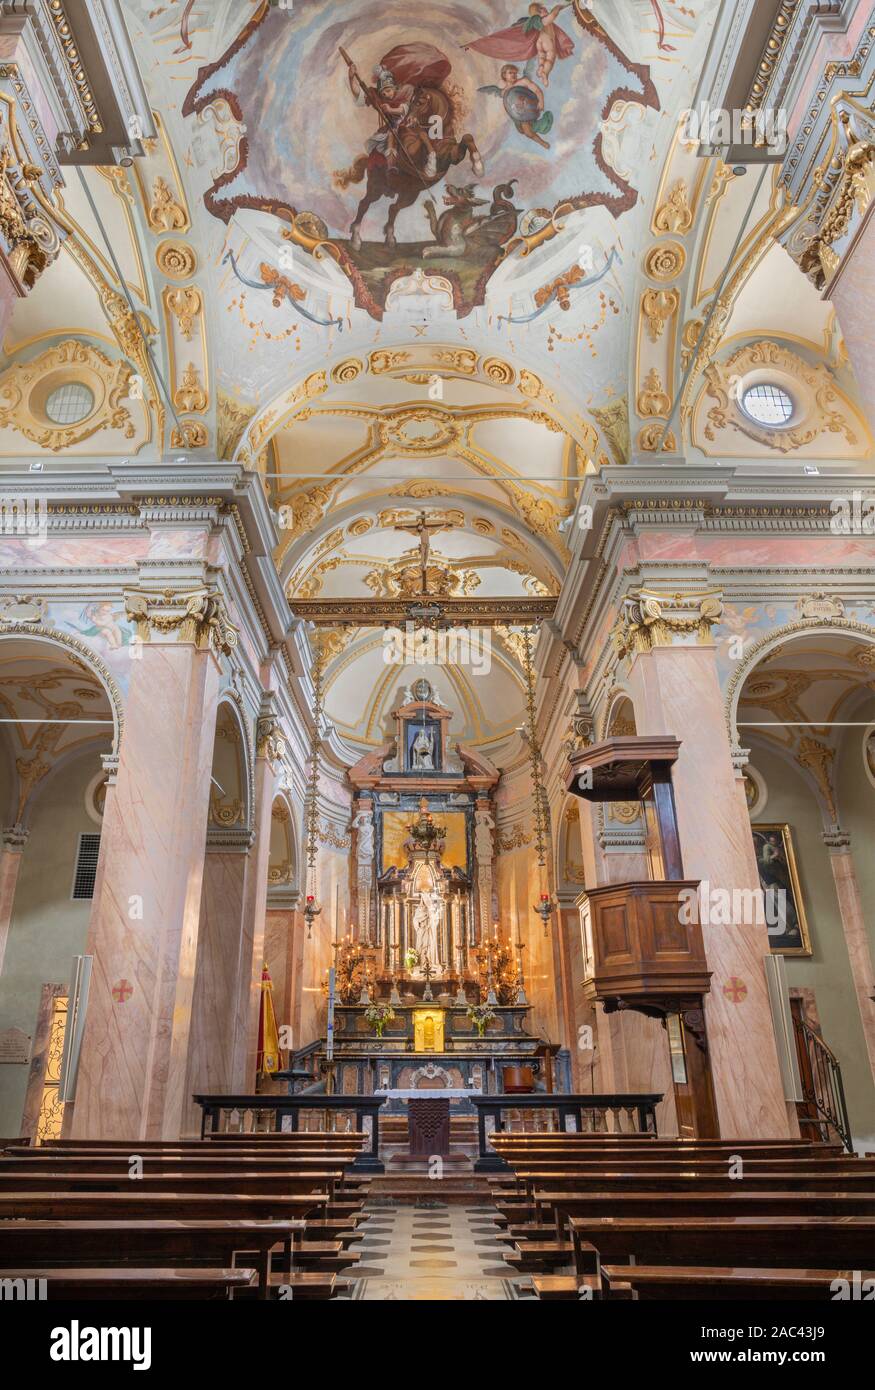 COMO, ITALY - MAY 8, 2015: The chruch Chiesa di San Giorgio with the baroque fresco of St. George by Giovanni  Paolo Recchi (1686). Stock Photo